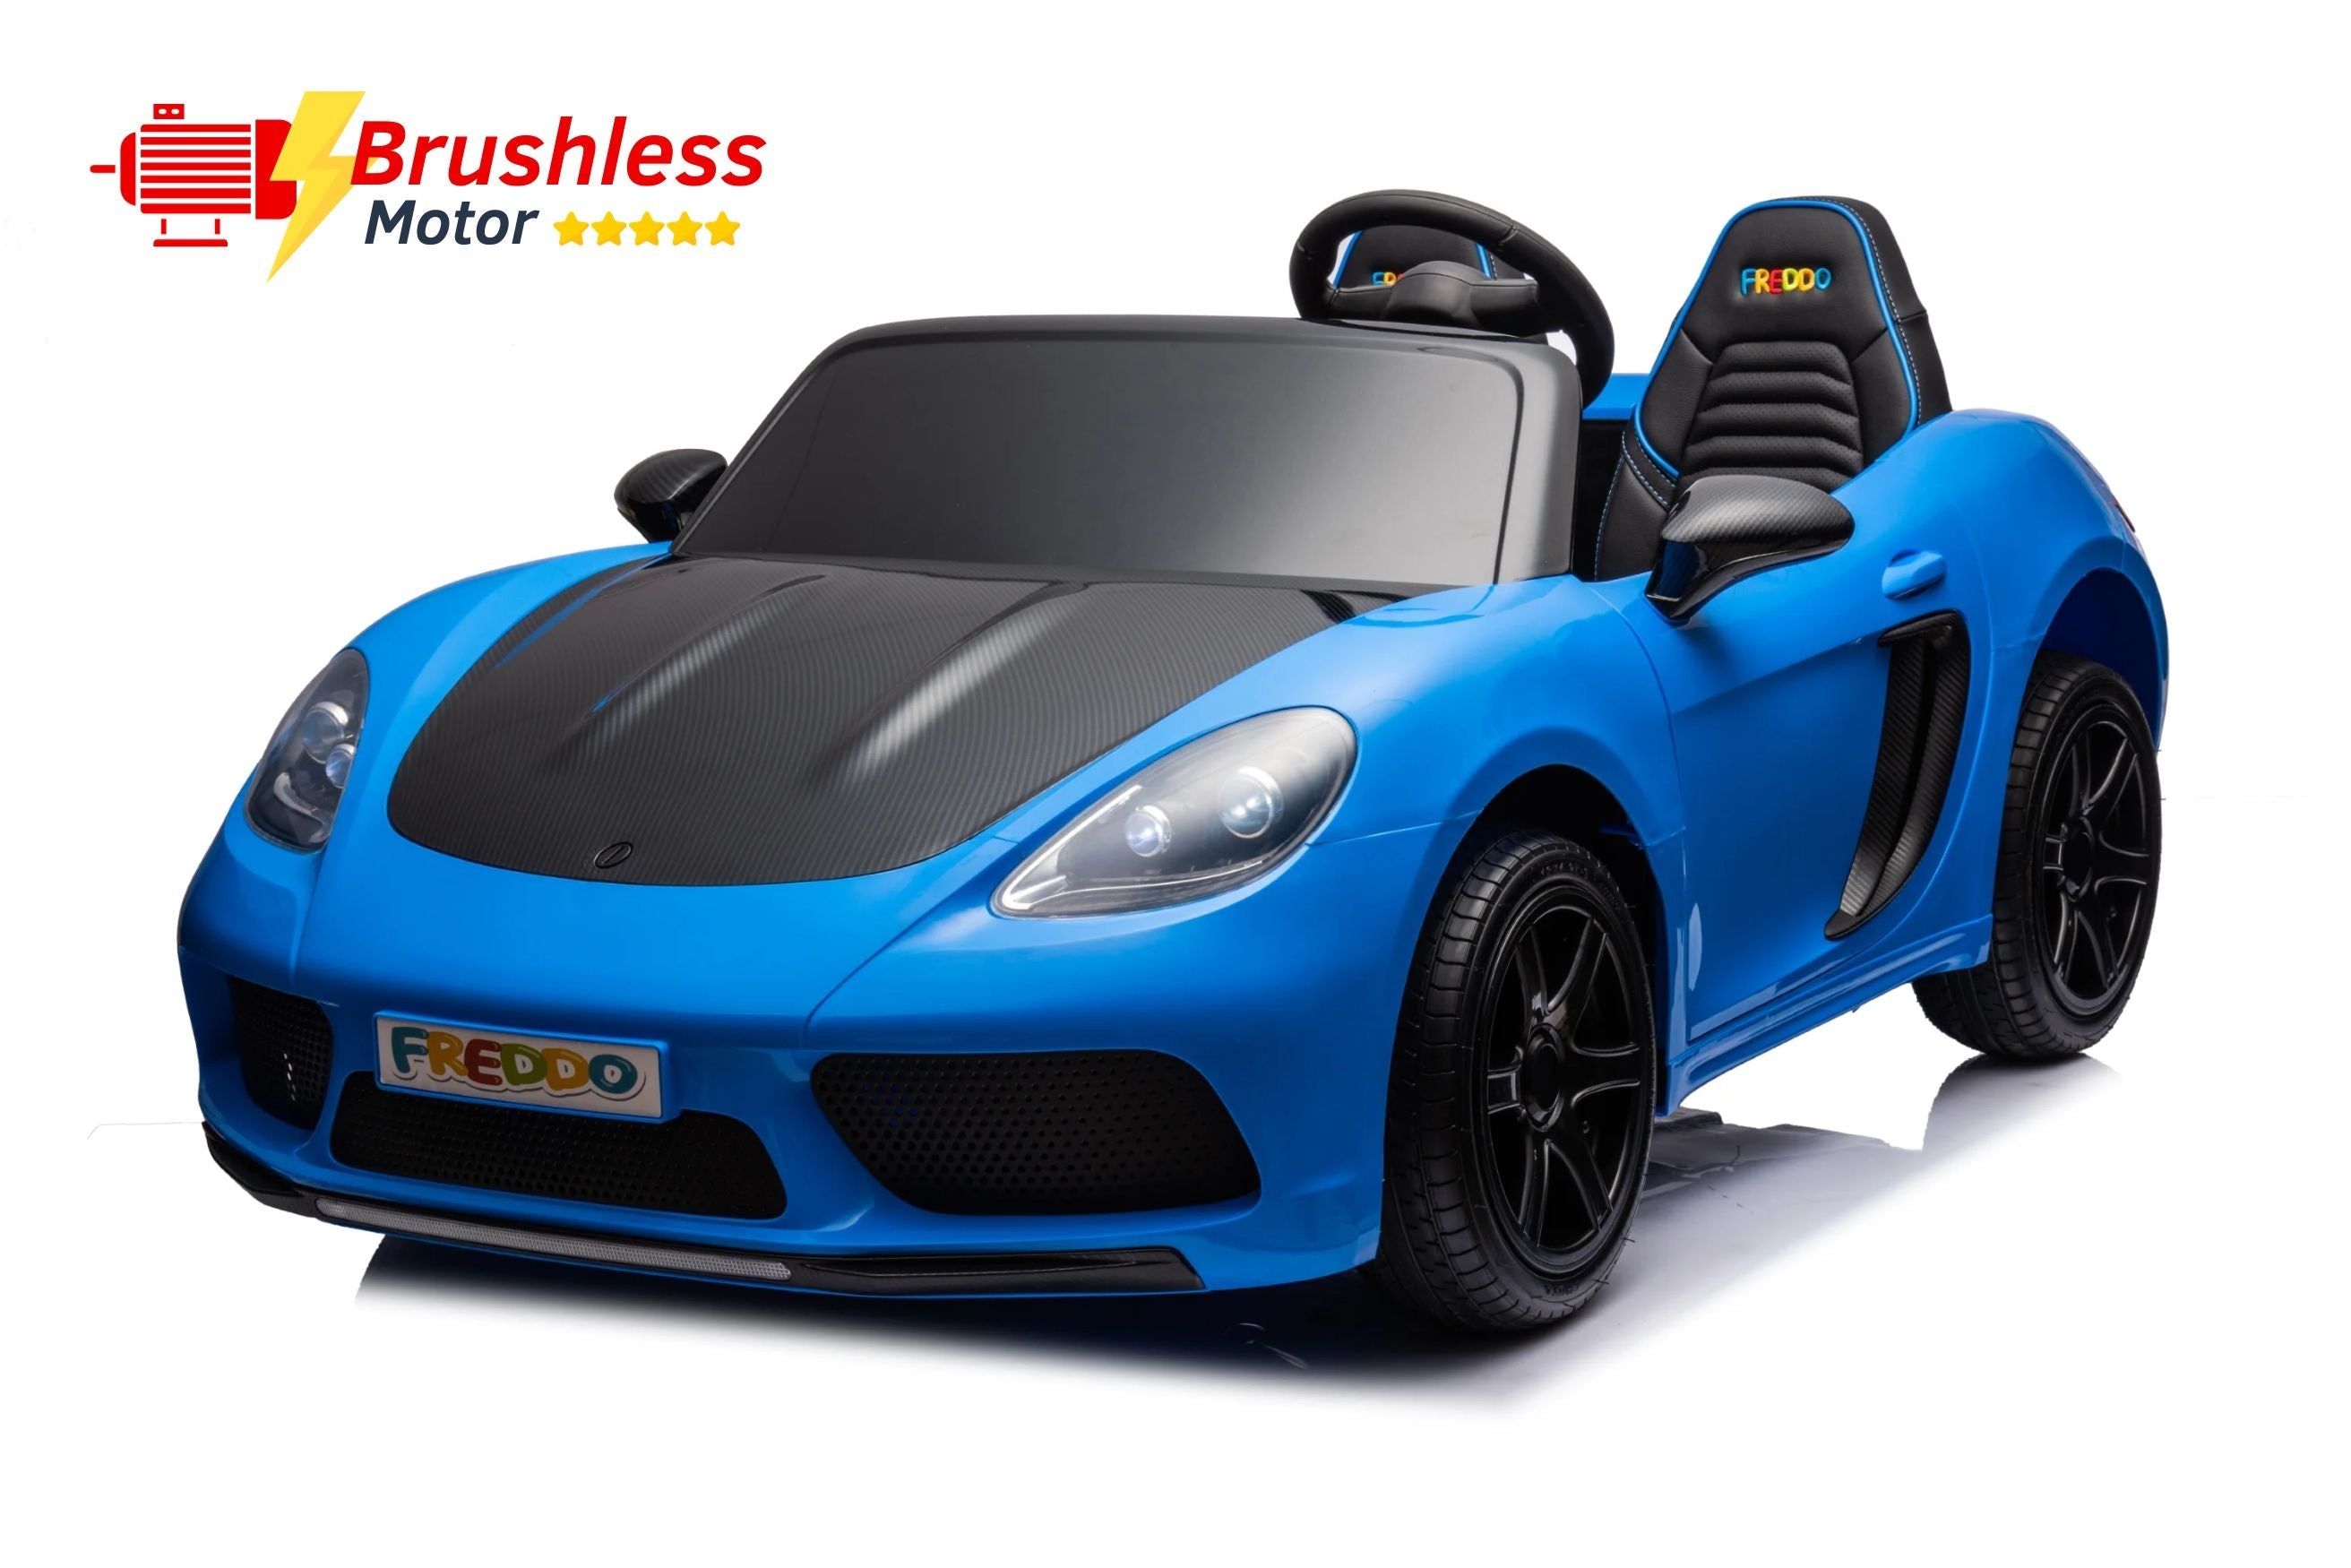 48V Freddo Rocket: World's Fastest 2-Seater Kids' Ride-On with Advanced Brushless Motor & Precision Differential